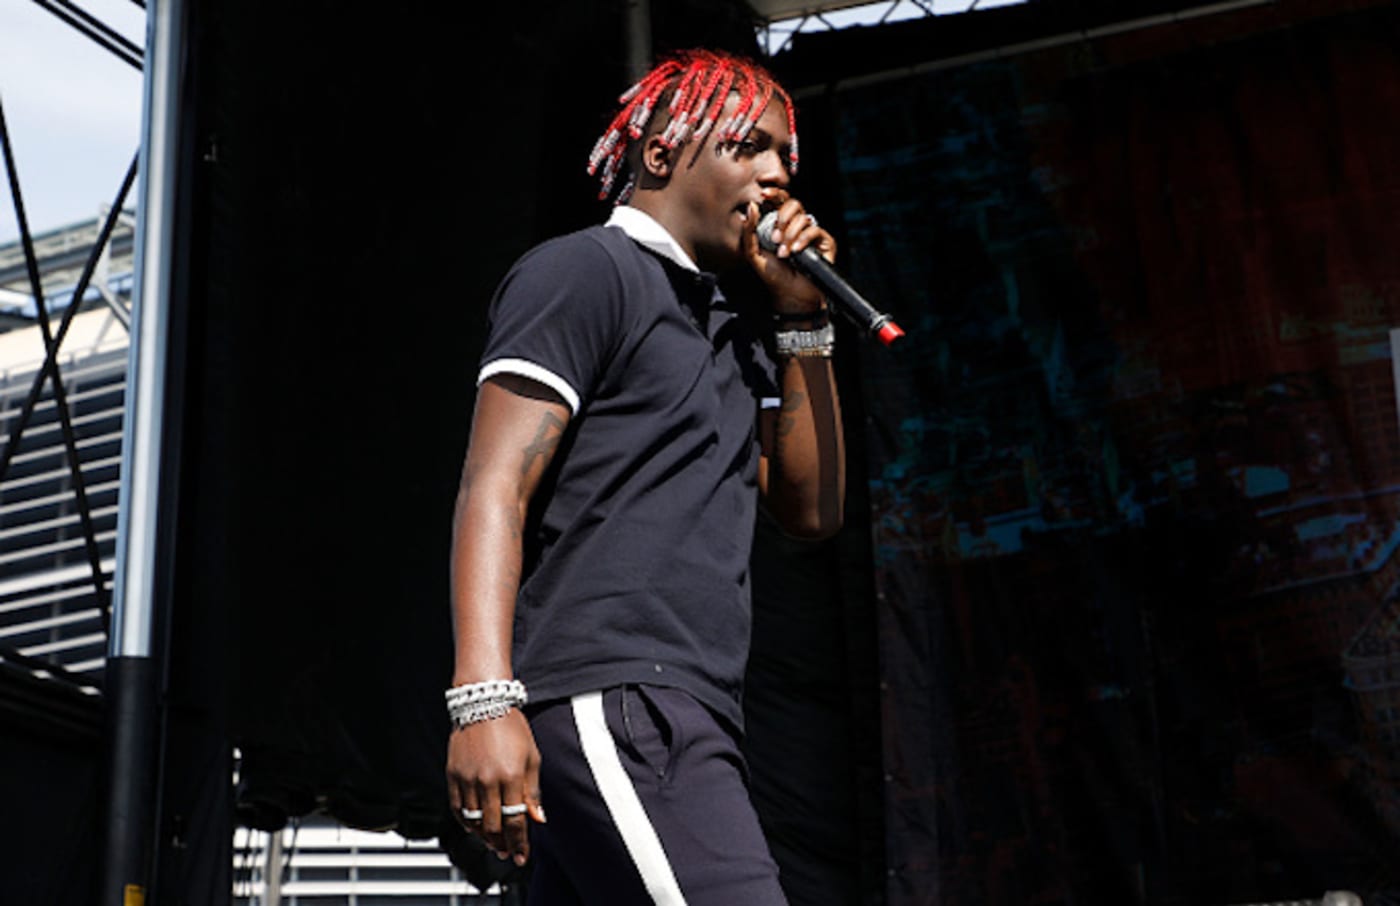 Lil Yachty performs during the 2017 Hot 97 Summer Jam